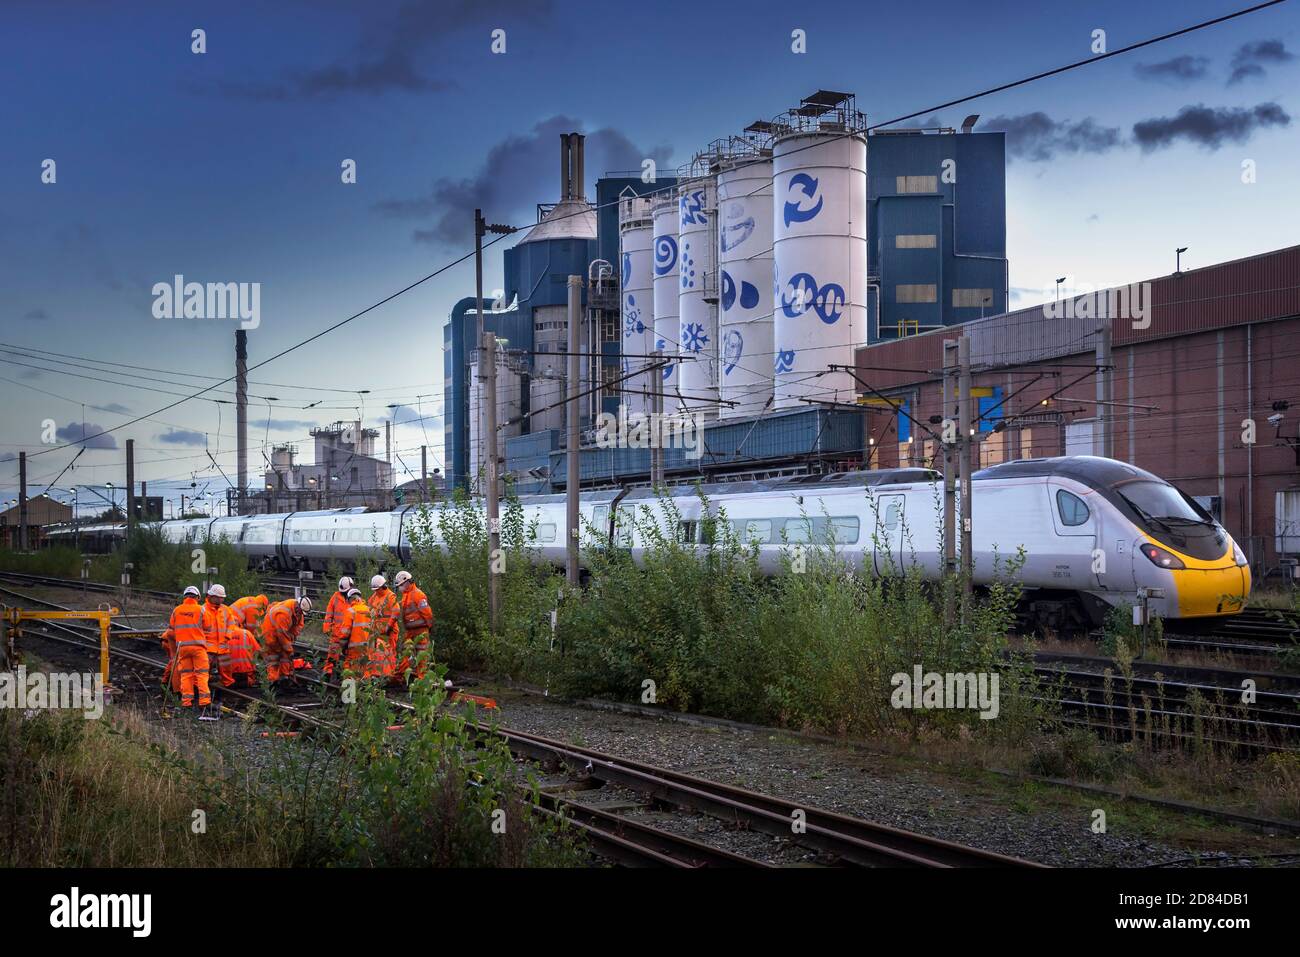 Network Rail track workers busy on the West Coast Main Line at Warrington Bank Quay station with the Unilever soaps factory in the early evening. Stock Photo